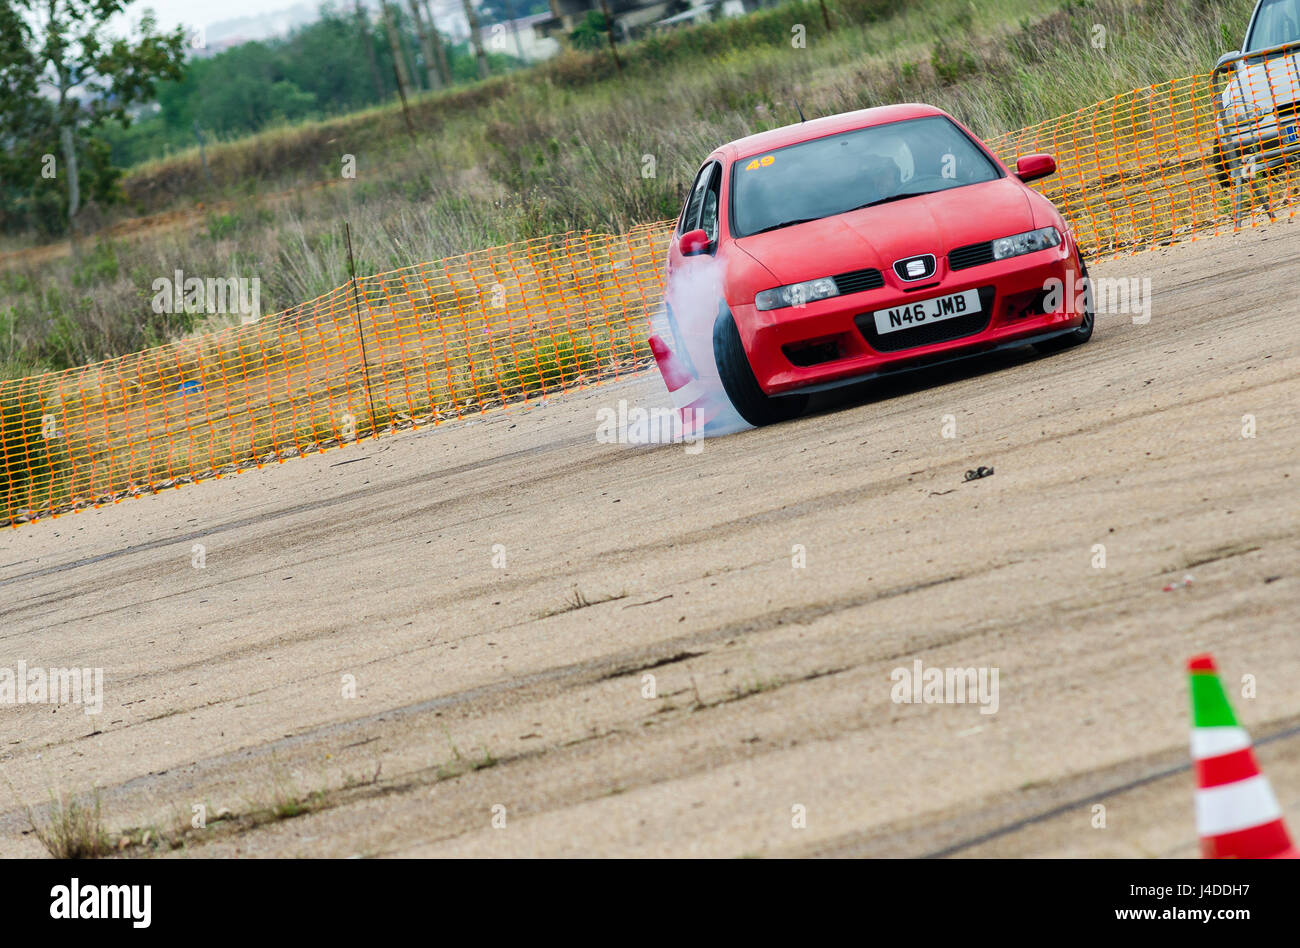 Caia, Portugal - April 30, 2017: Unidentified driver participates in a drifting demonstration at Drift Garnd Prix of Caia Contest. Stock Photo